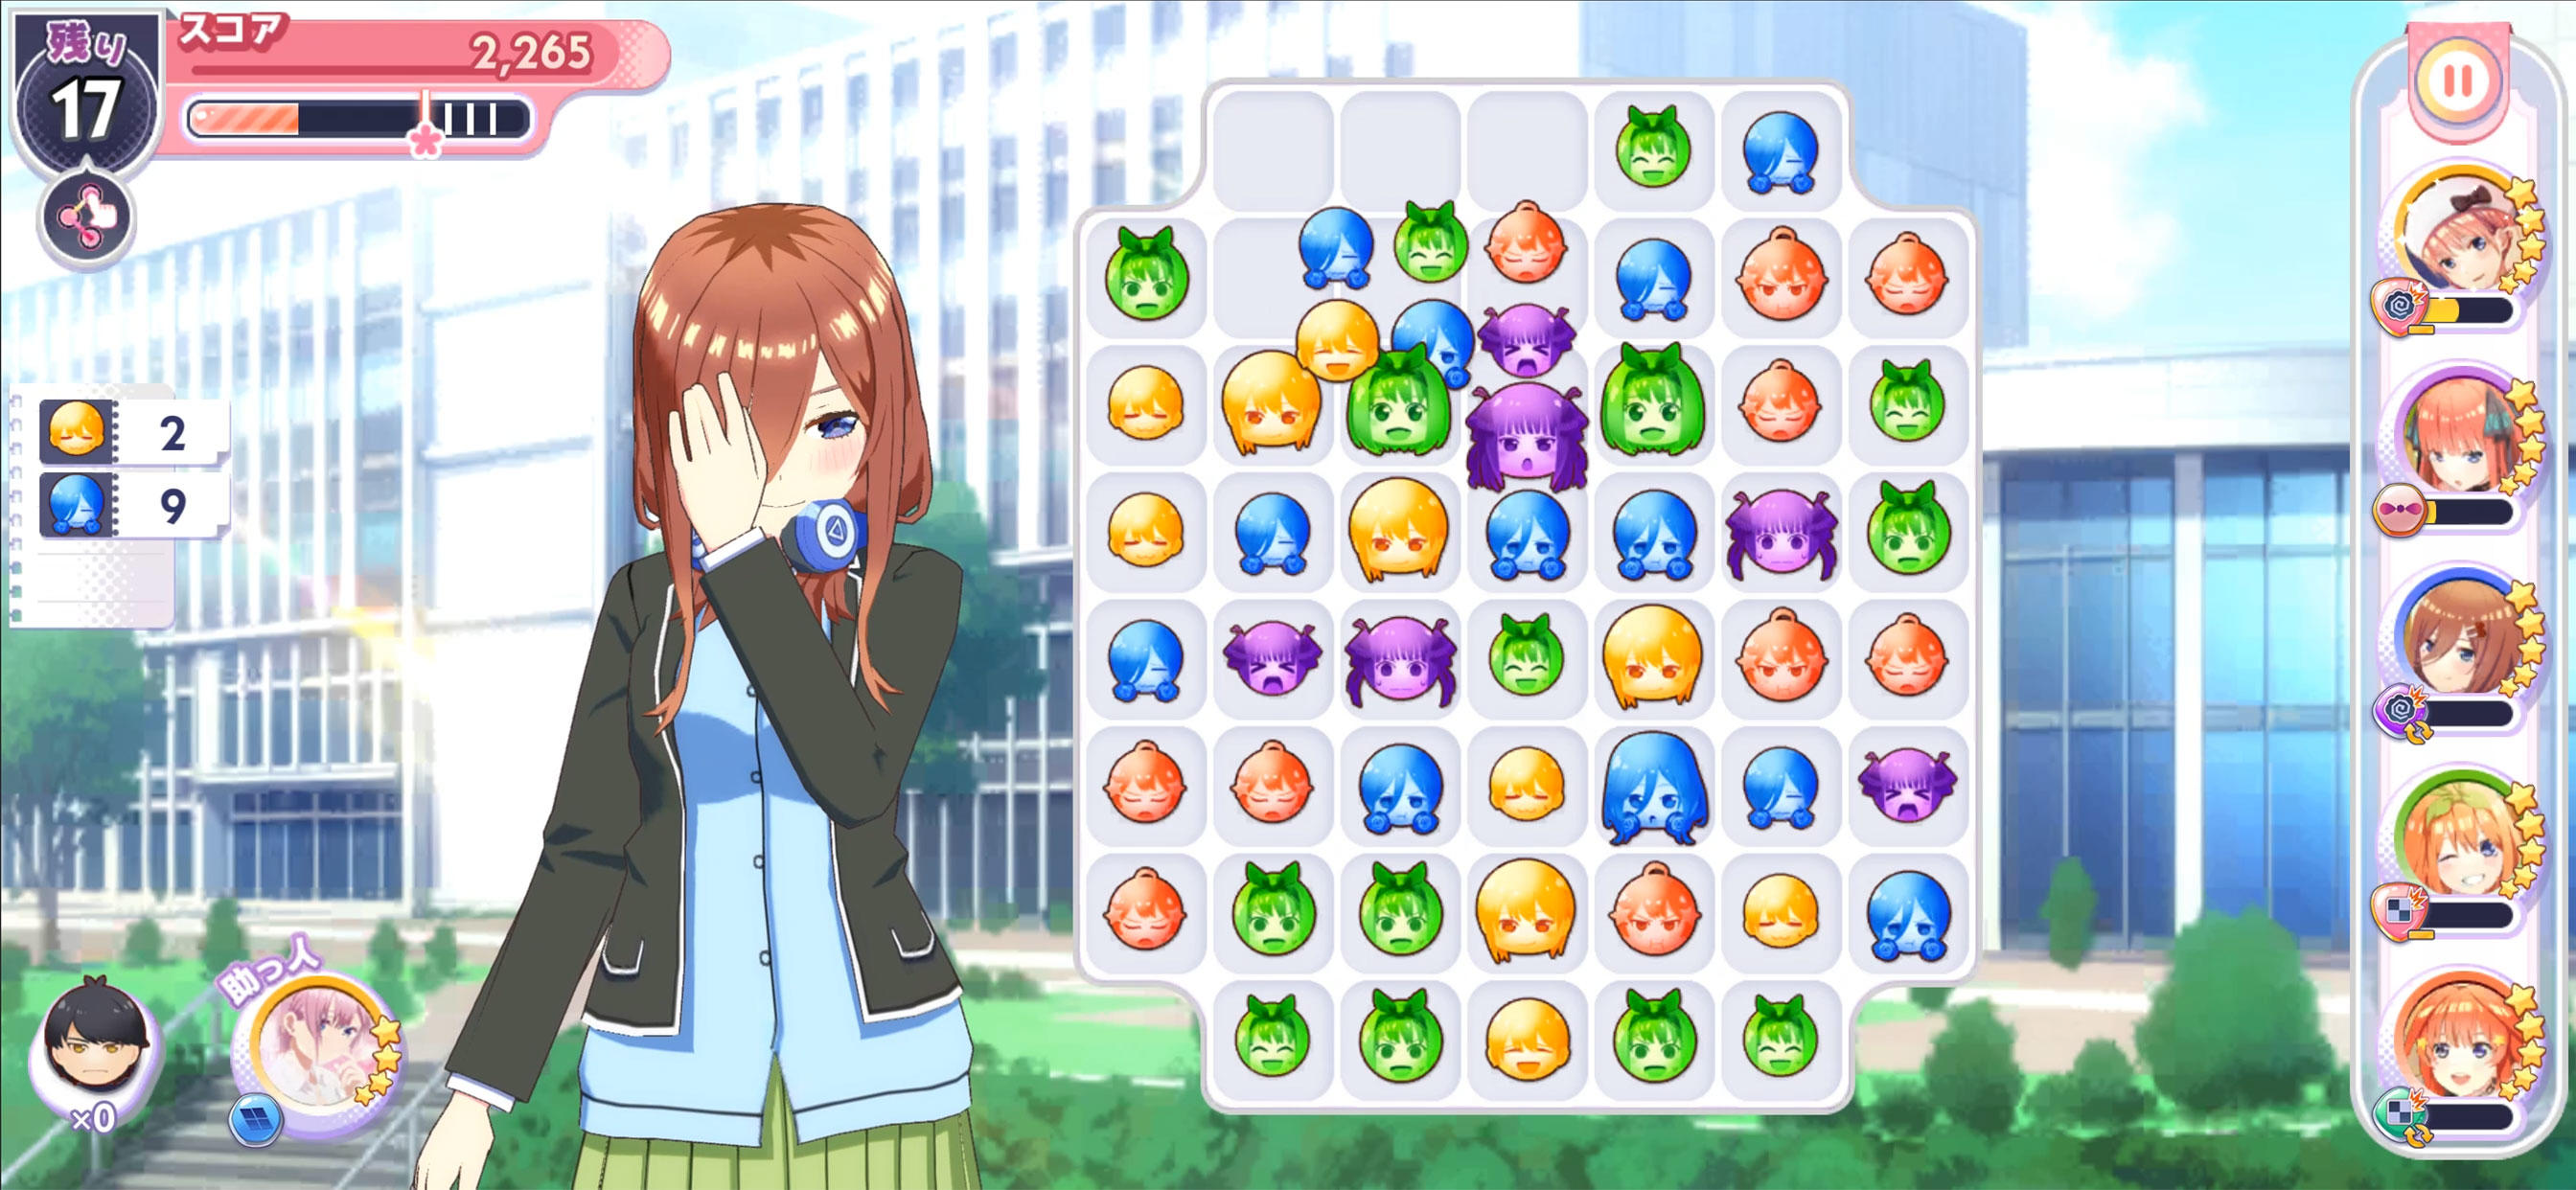 QooApp: Anime Game Platform - Some previews of The Quintessential  Quintuplets season 2 episode 1! Download The Quintessential Quintuplets: The  Quintuplets Can't Divide the Puzzle Into Five Equal Parts